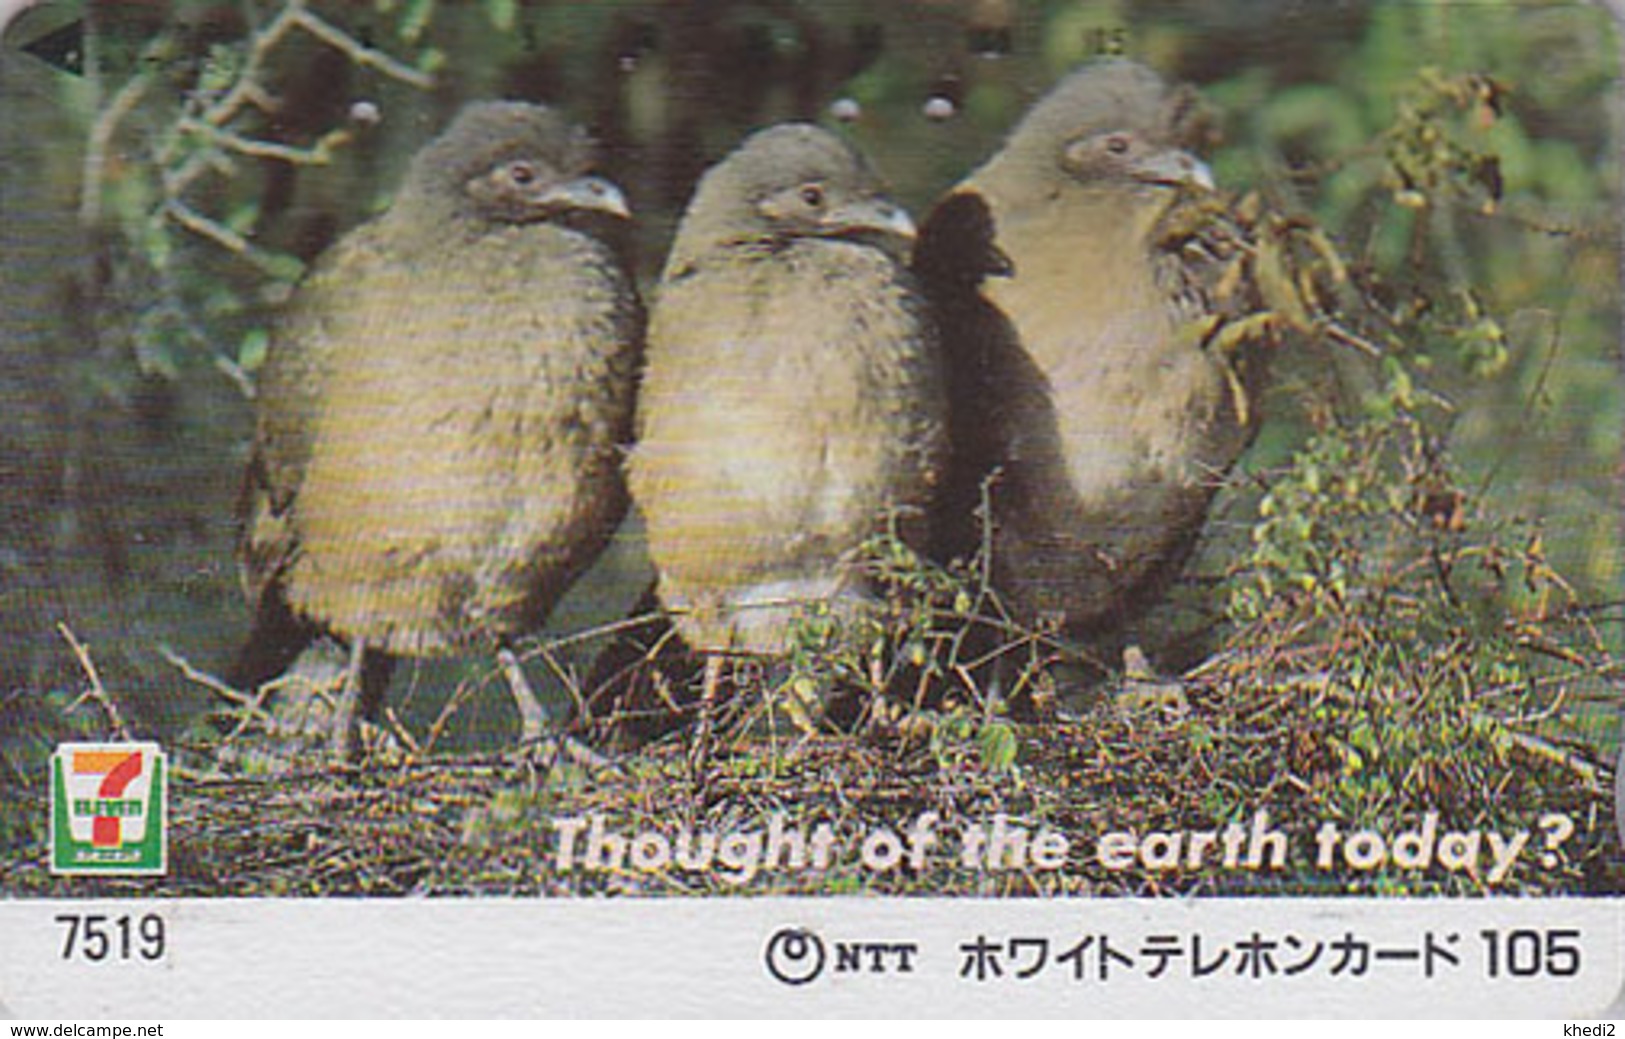 Télécarte JAPON / SERIE 7/11 - 7519 TBE - THOUGHT OF THE EARTH TODAY - ANIMAL - OISEAU - BIRD JAPAN Phonecard - Vogel BE - Zangvogels